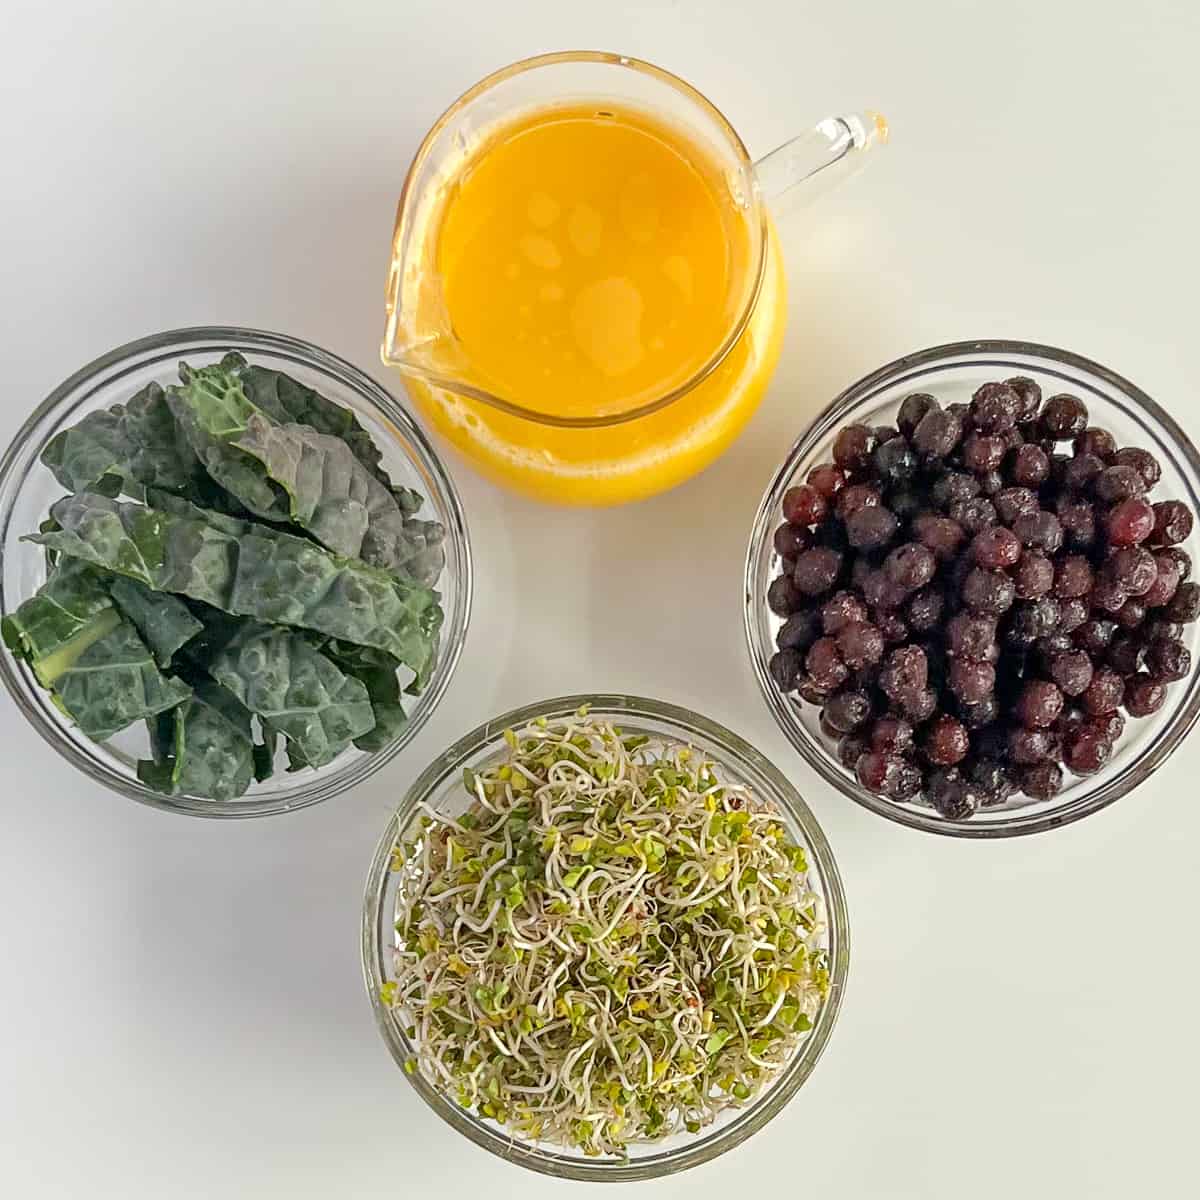 top view of the key ingredients in the immunity booster smoothie: orange juice, wild blueberries, broccoli sprouts and kale